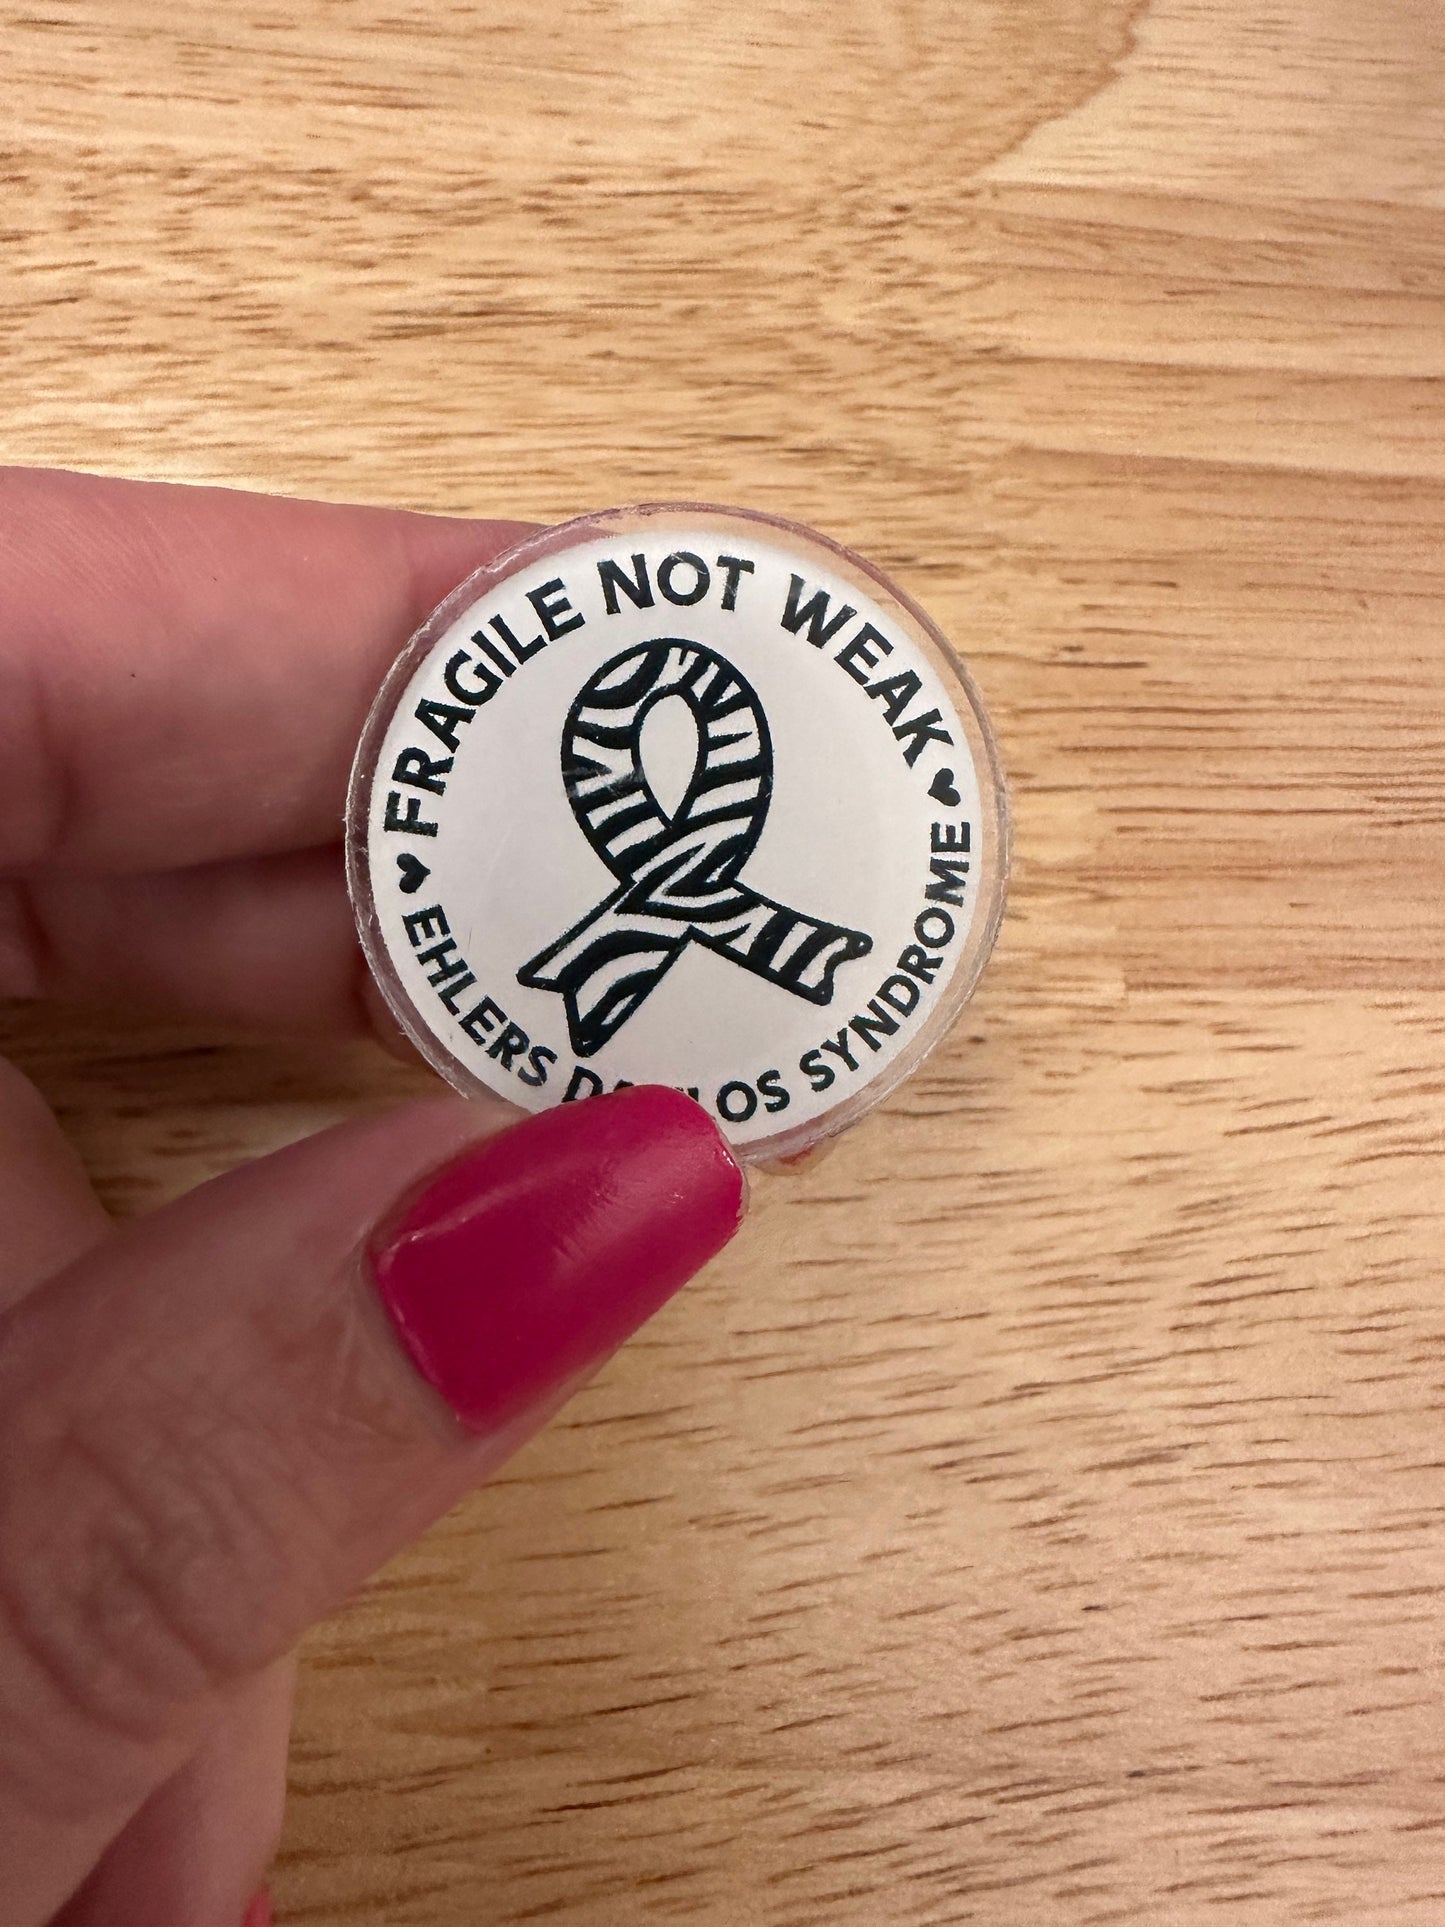 EDS Acrylic Pin, Fragile not Weak, ehlers danlos syndrome pin